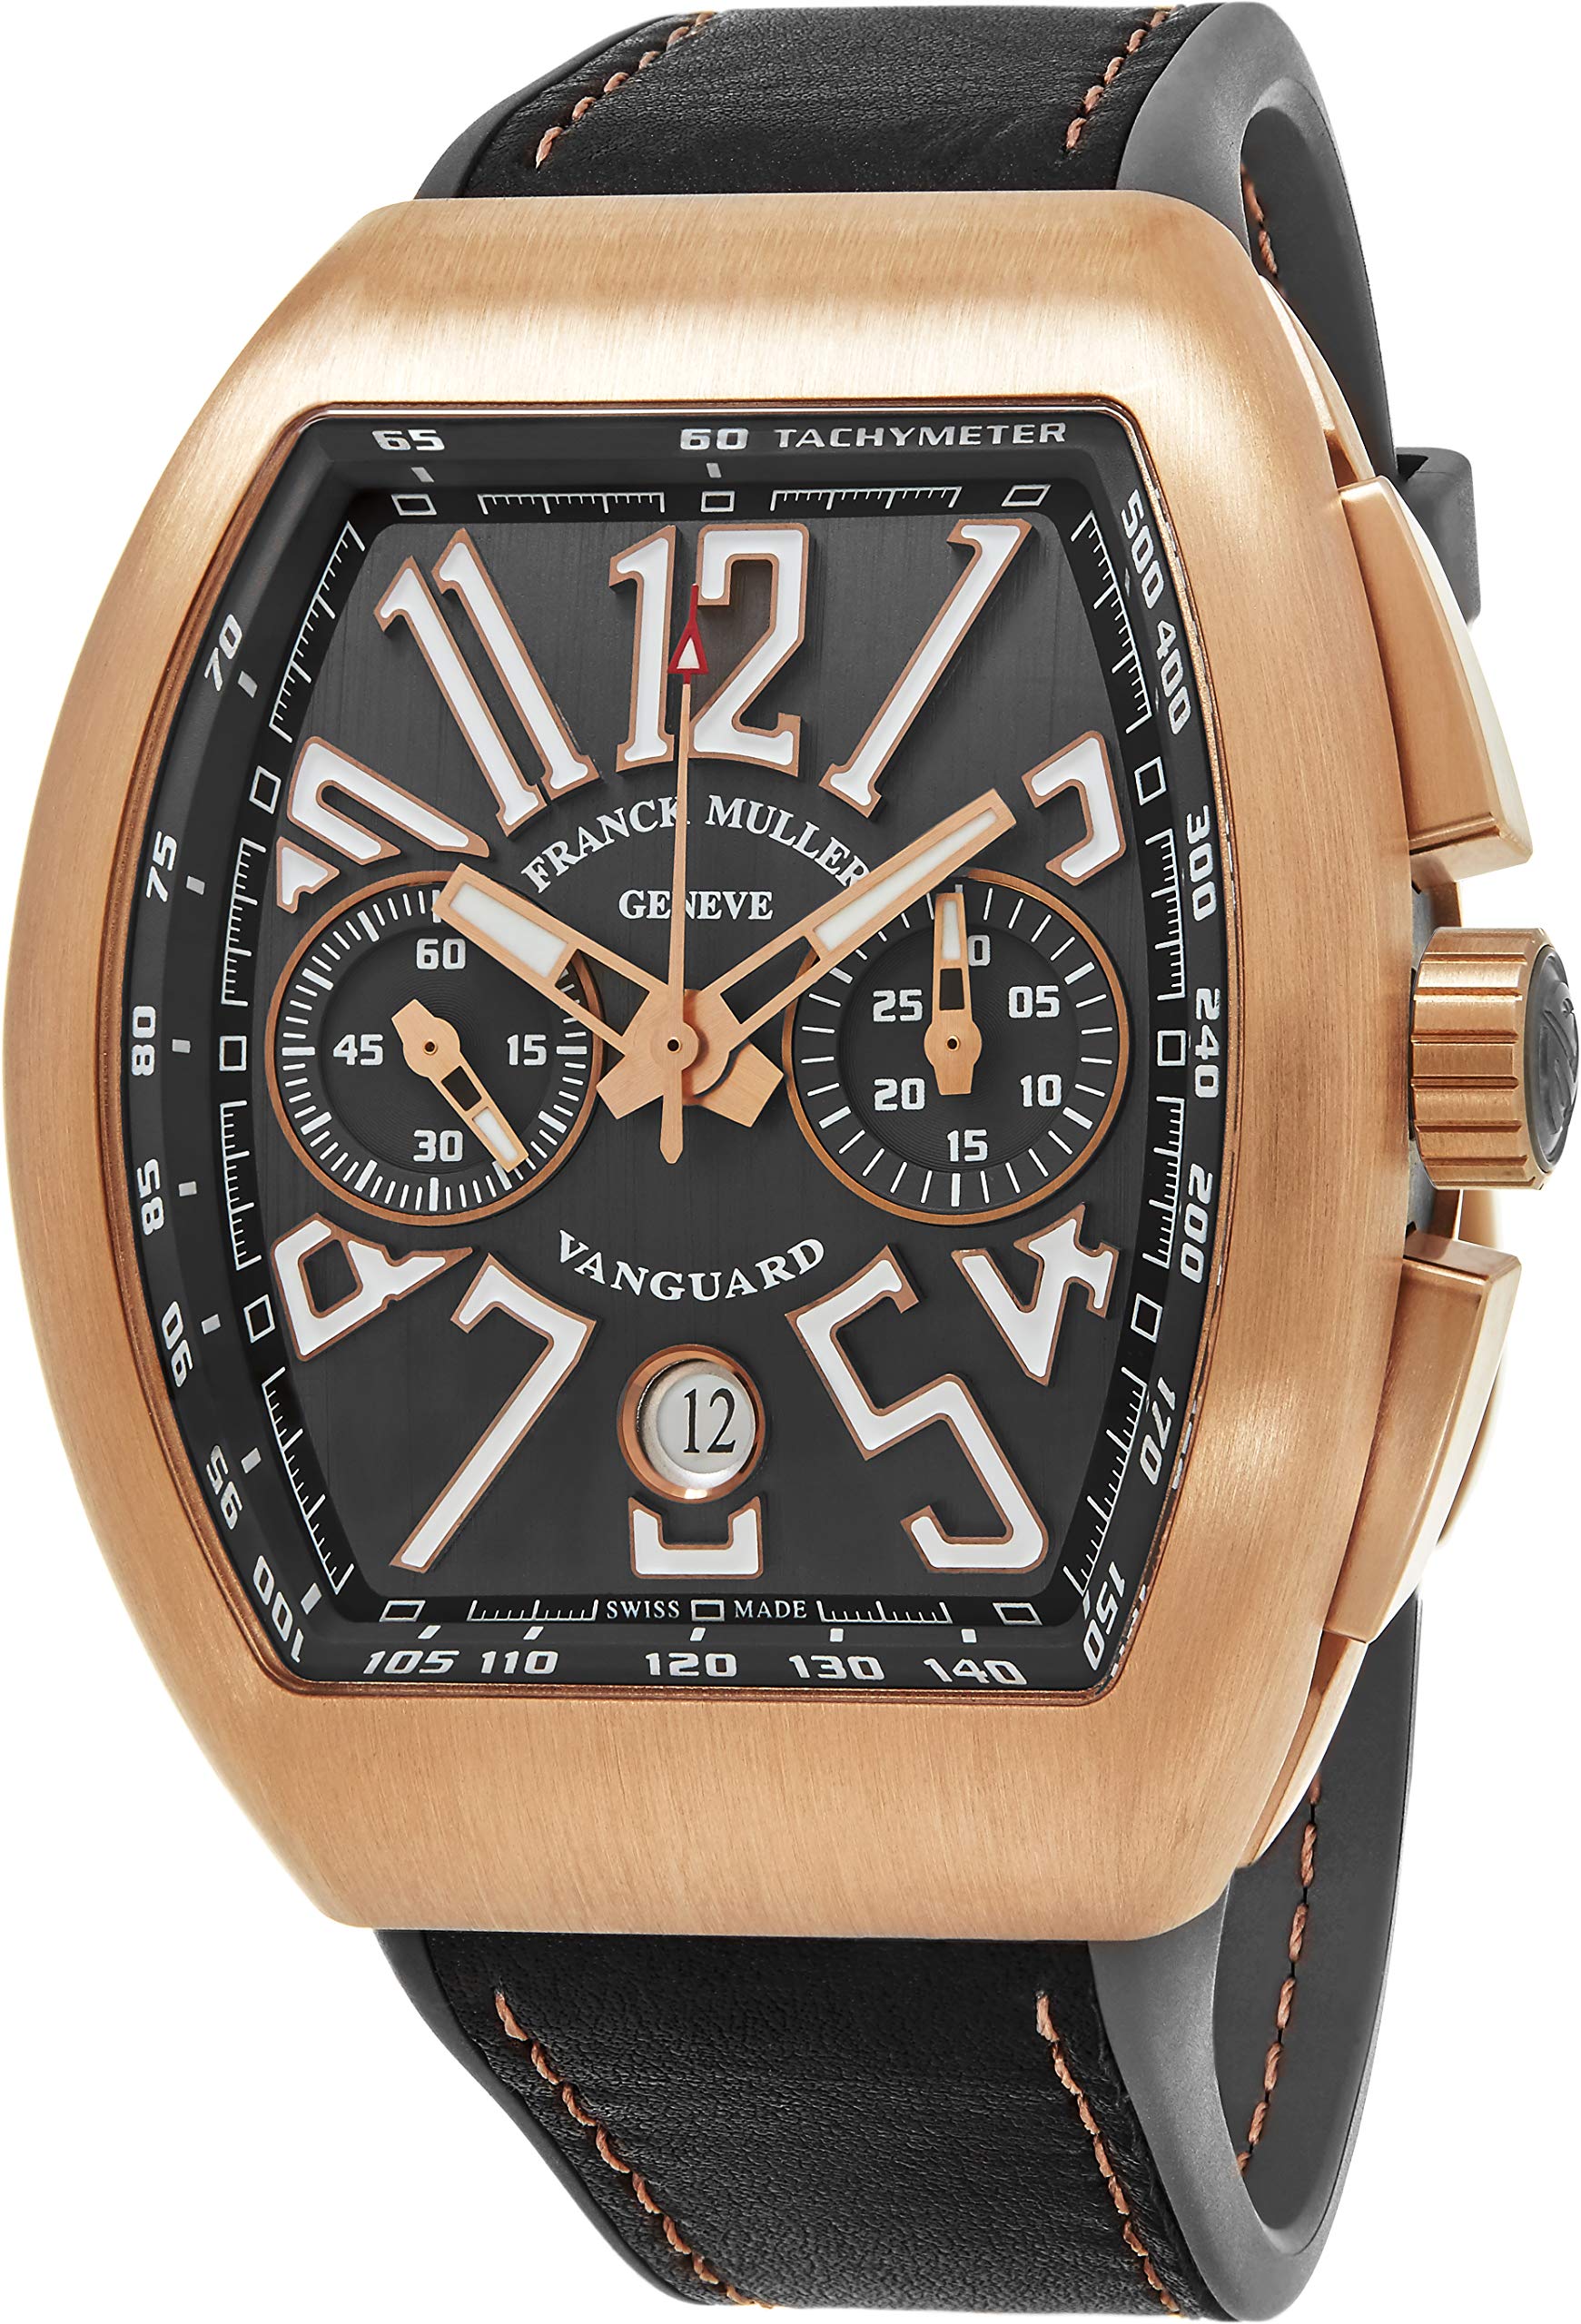 Franck Muller Vanguard Mens Rose Gold Automatic Chronograph Watch - Tonneau Black Face with Luminous Hands, Date and Sapphire Crystal - Swiss Made with Tachymeter Scale V 45 CC DT 5N BR NR